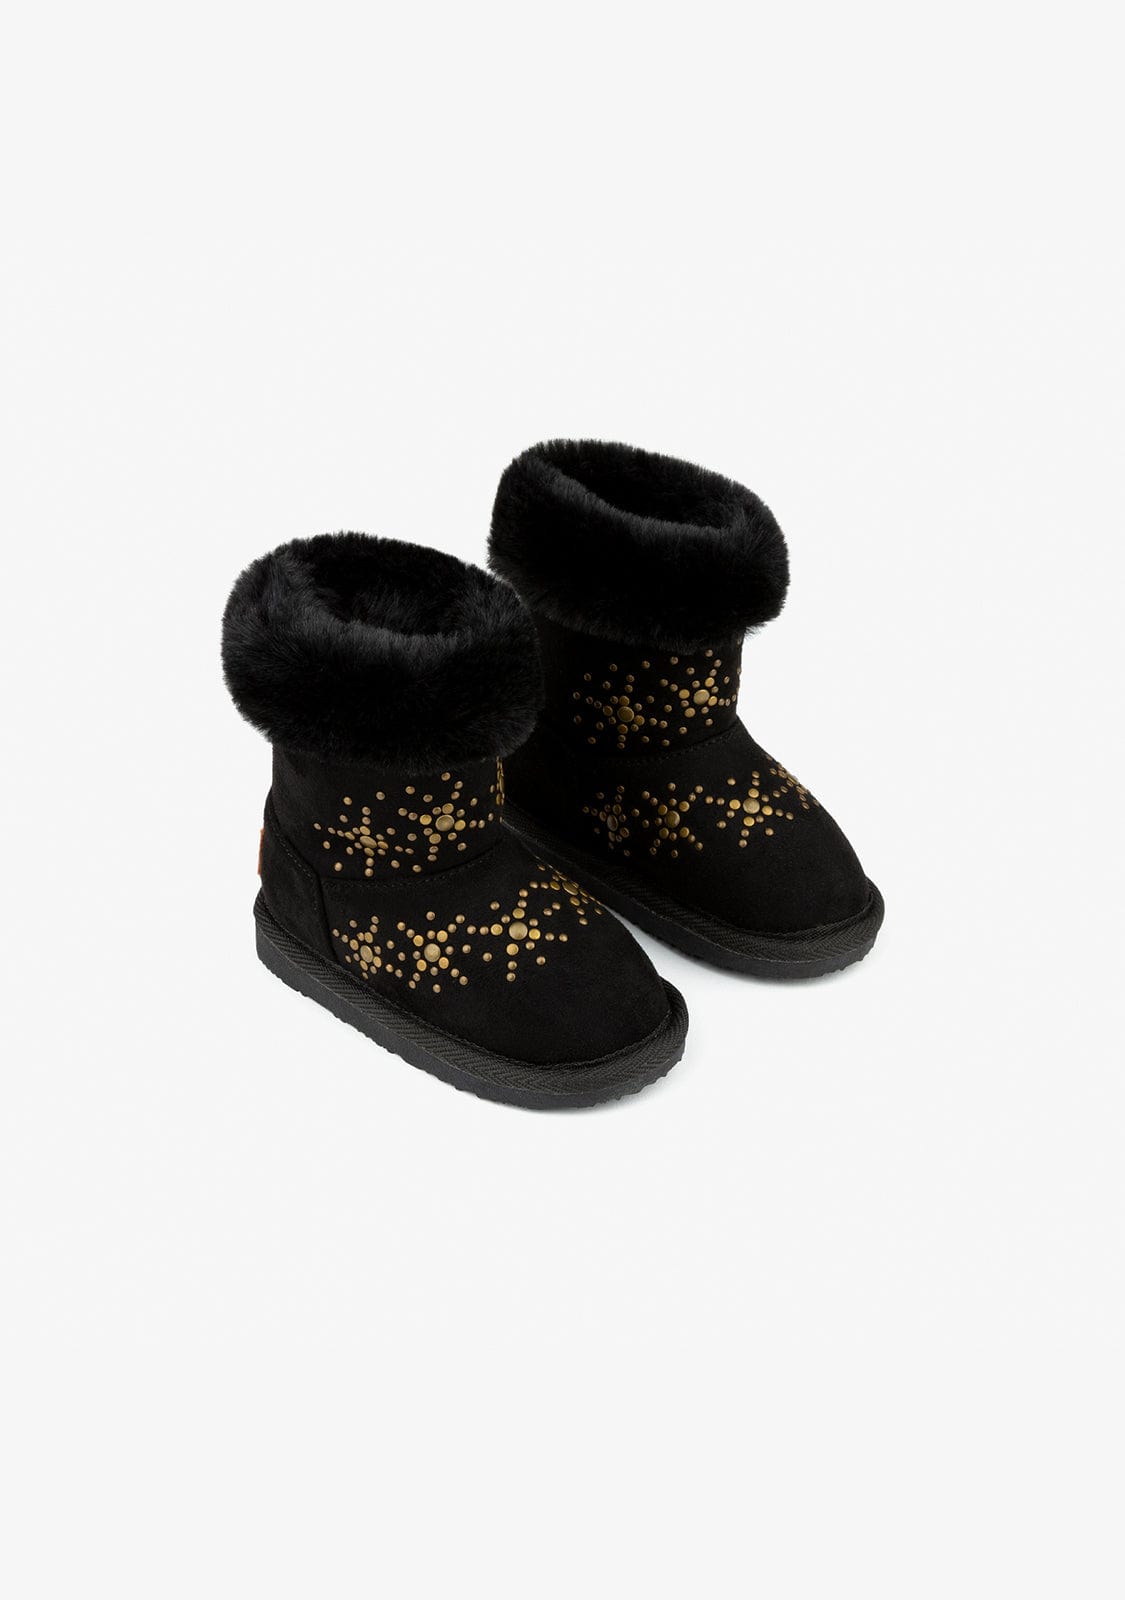 OSITO Shoes Baby's Black Snow Australian Boots